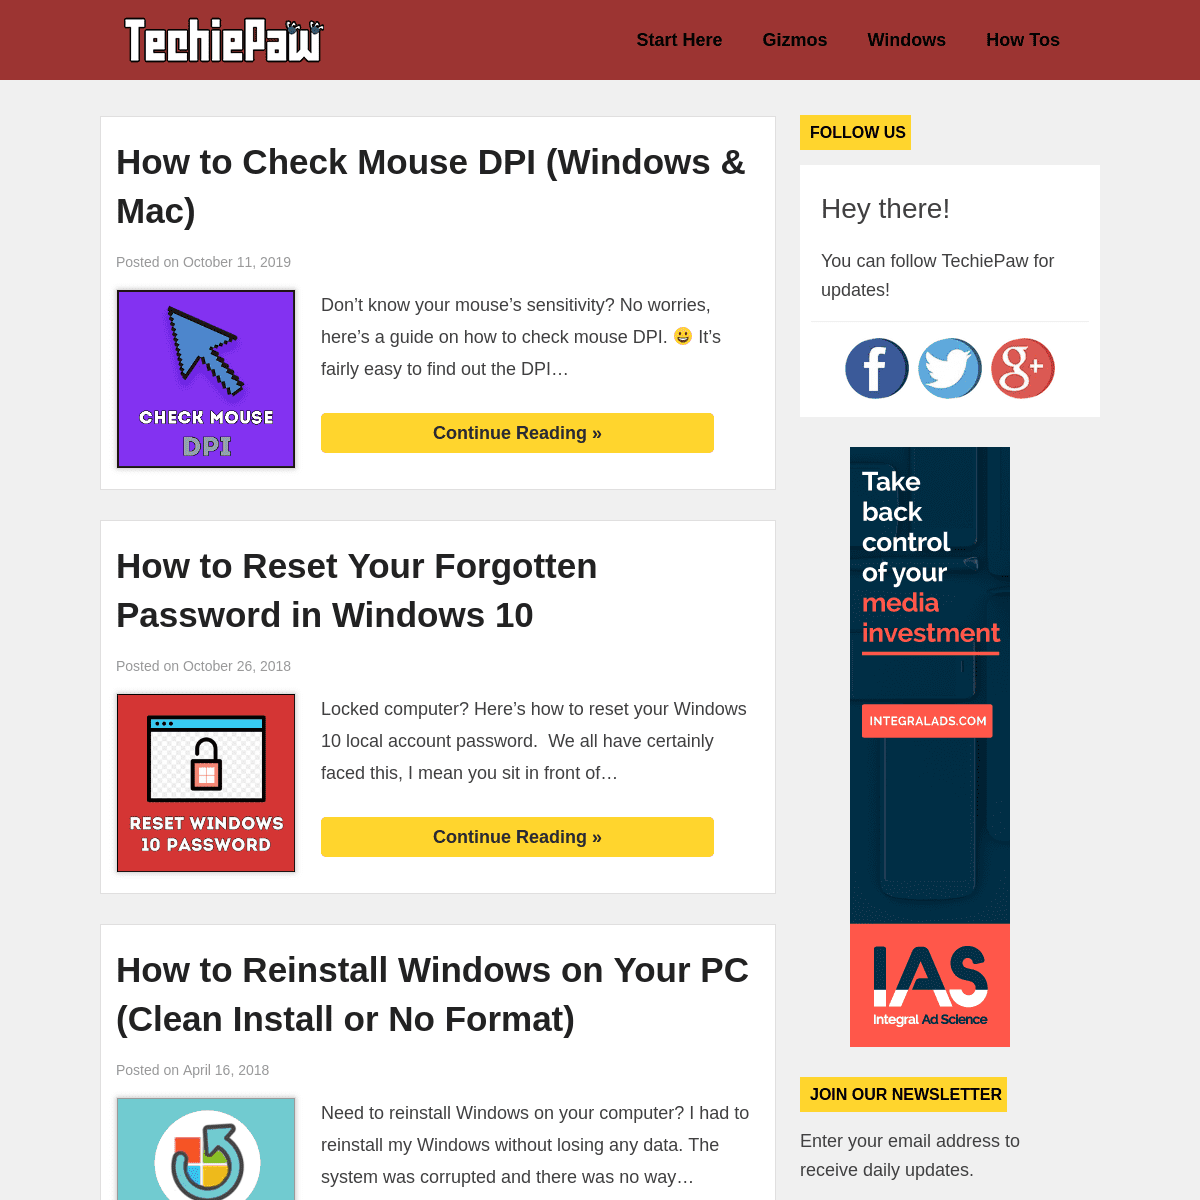 A complete backup of techiepaw.com